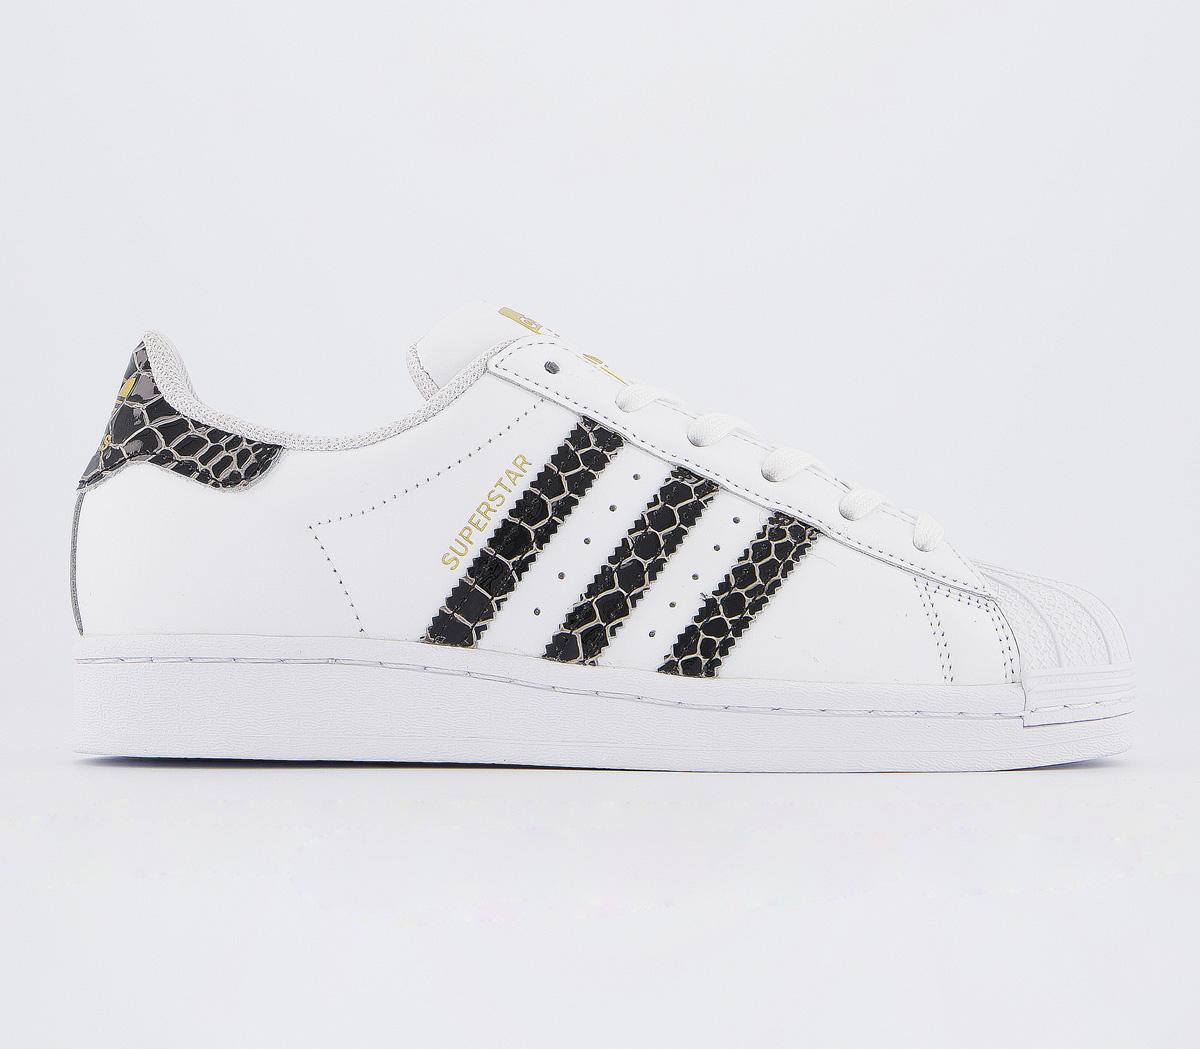 adidas white & gold superstar trainers